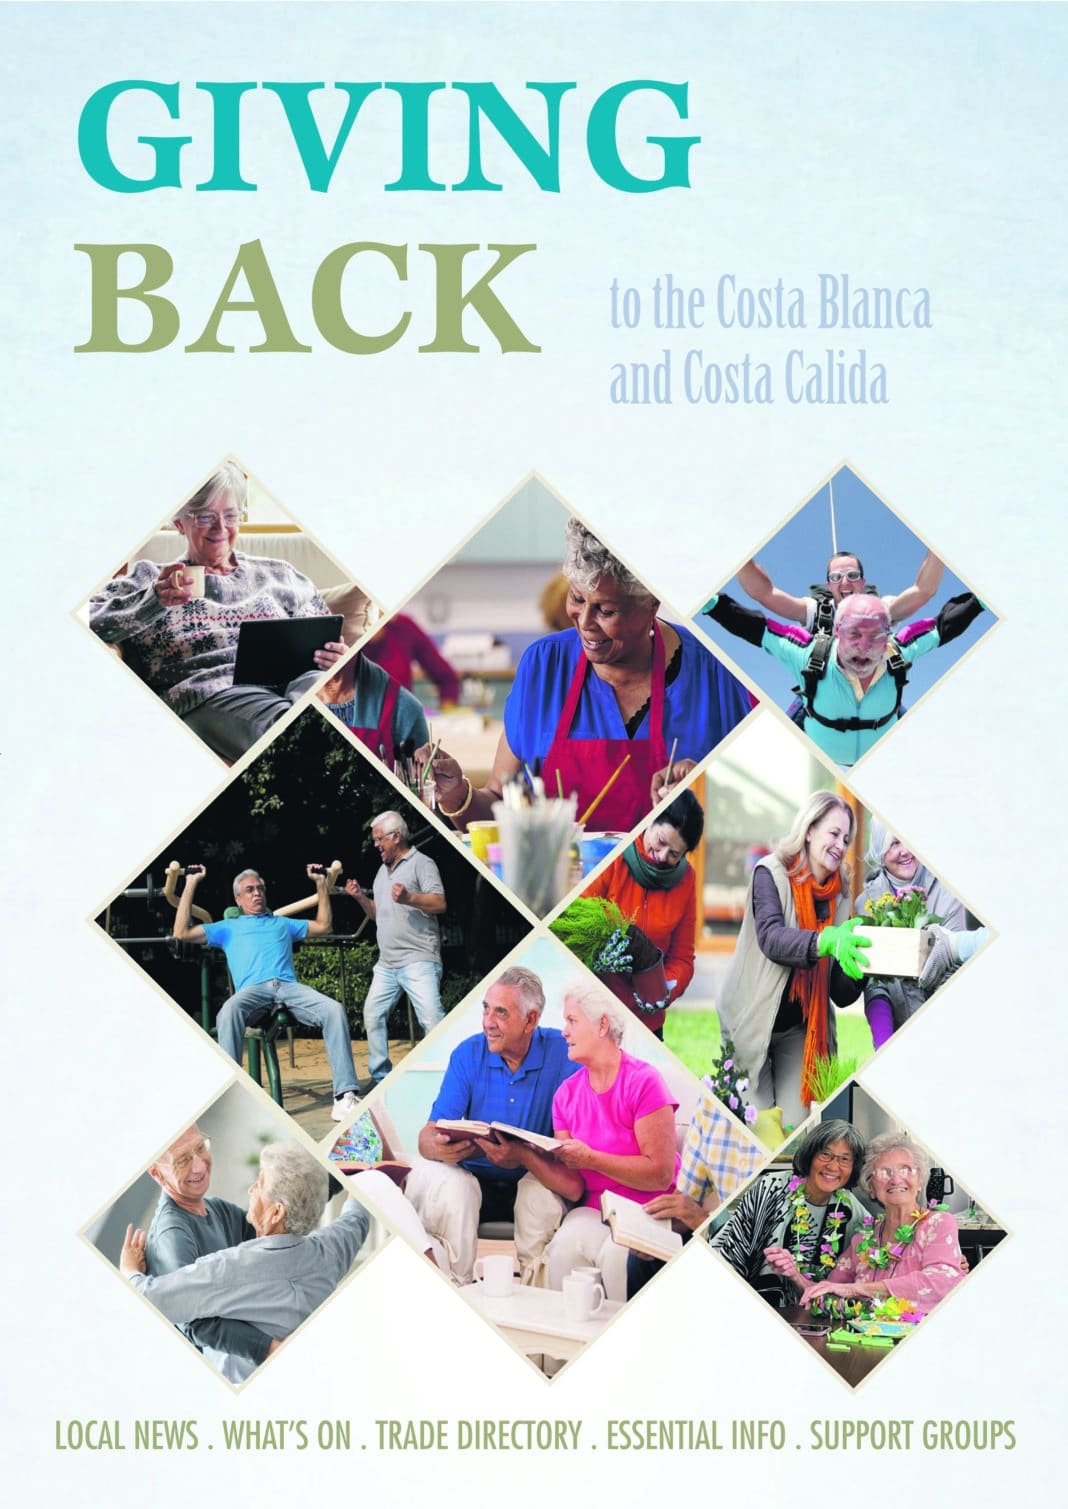 Giving Back to the Costa Blanca and Costa Calida